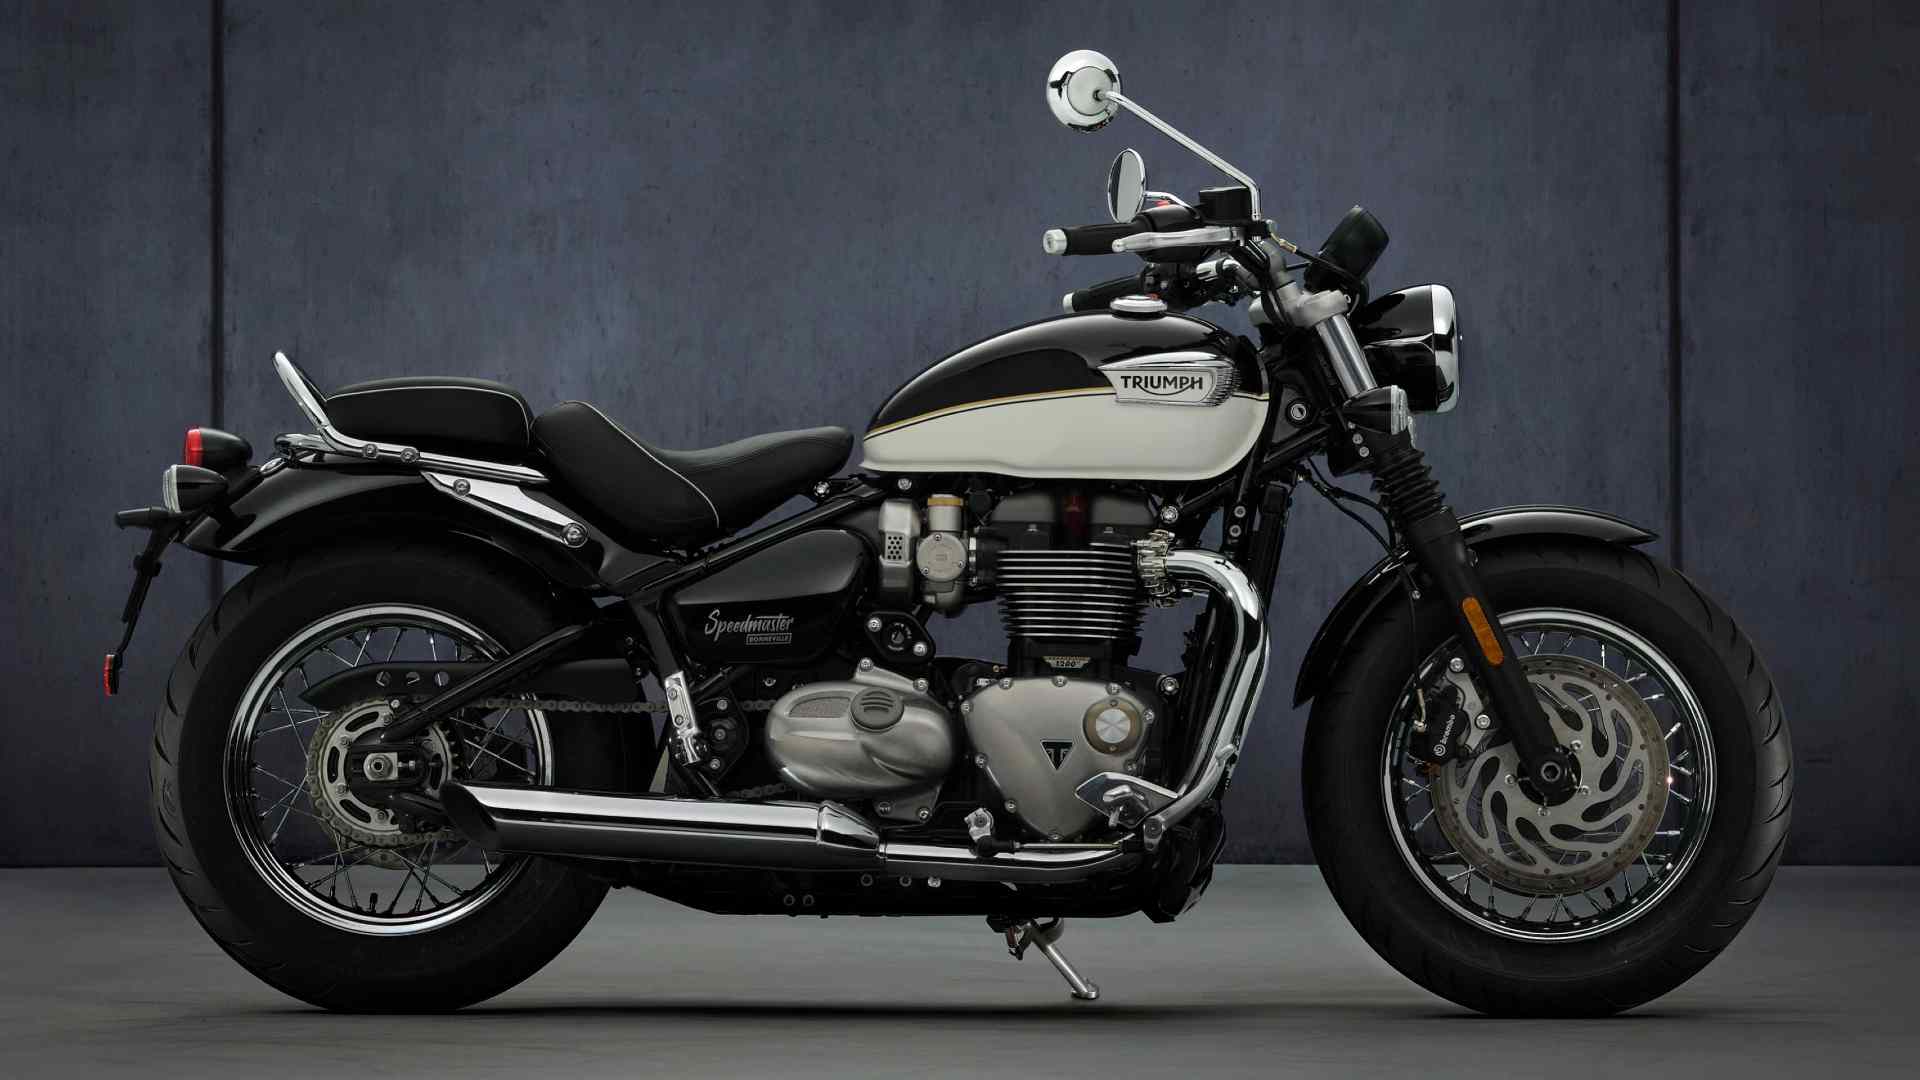 New for the 2021 Triumph Speedmaster are a fatter 47mm Showa fork and 'comfort' seats. Image: Triumph Motorcycles